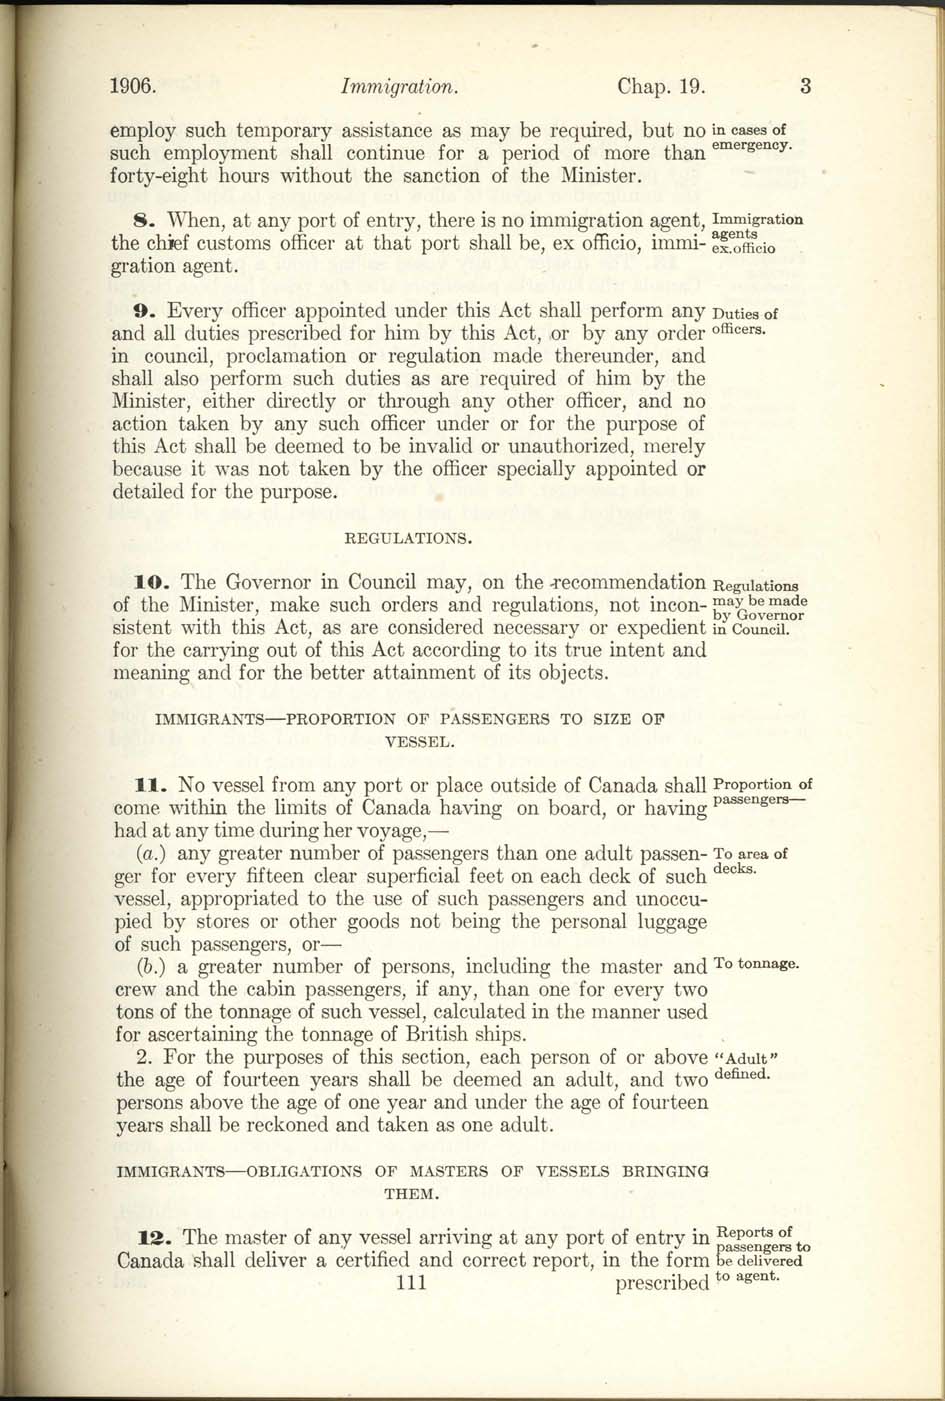 Chap. 19 Page 111 Immigration Act, 1906